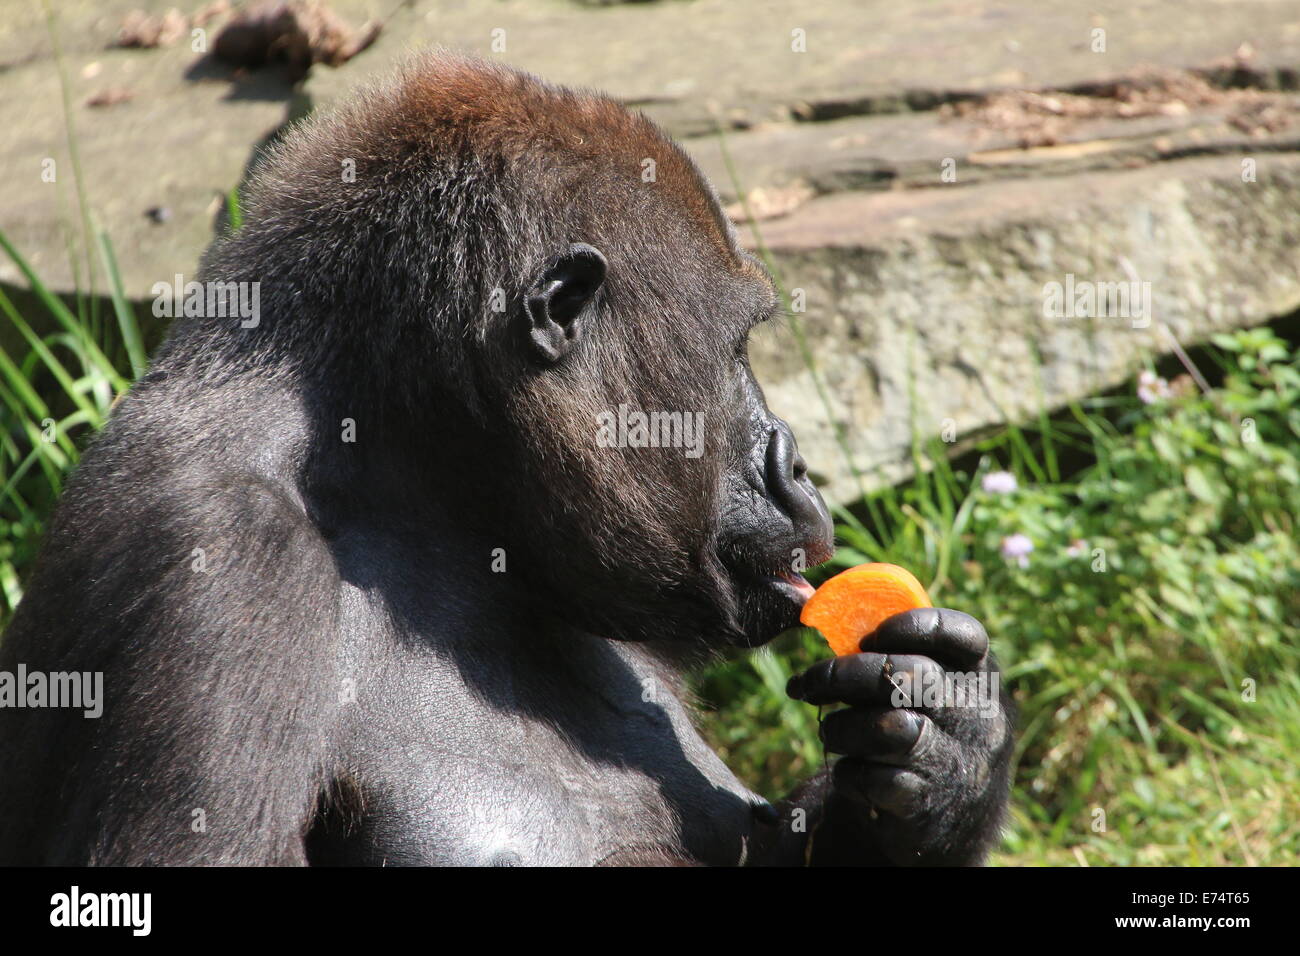 Gorilla eating a carrot  at Apenheul primate zoo, Apeldoorn, The Netherlands Stock Photo